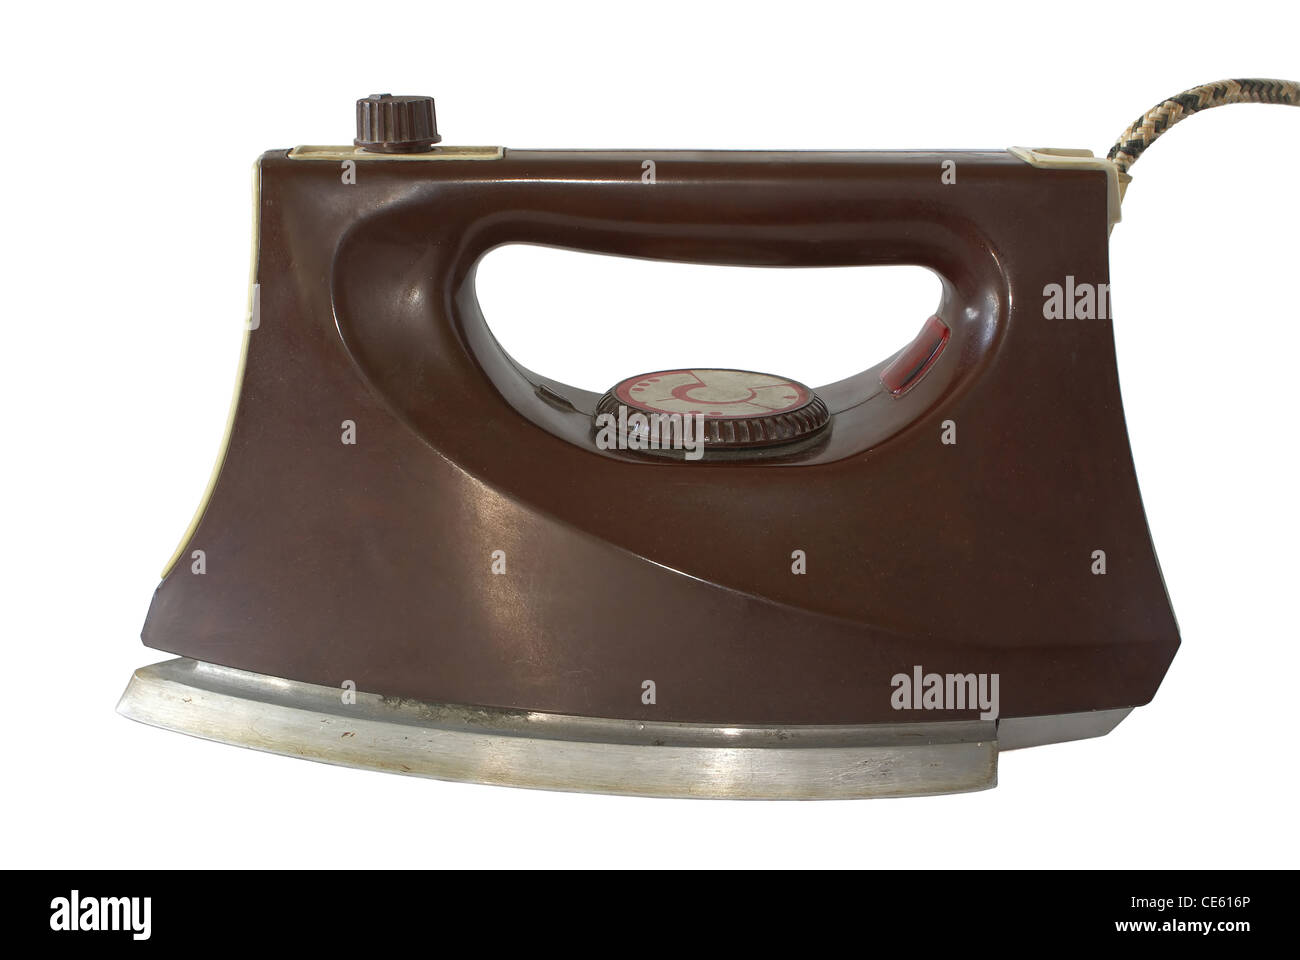 Old electric iron. Stock Photo